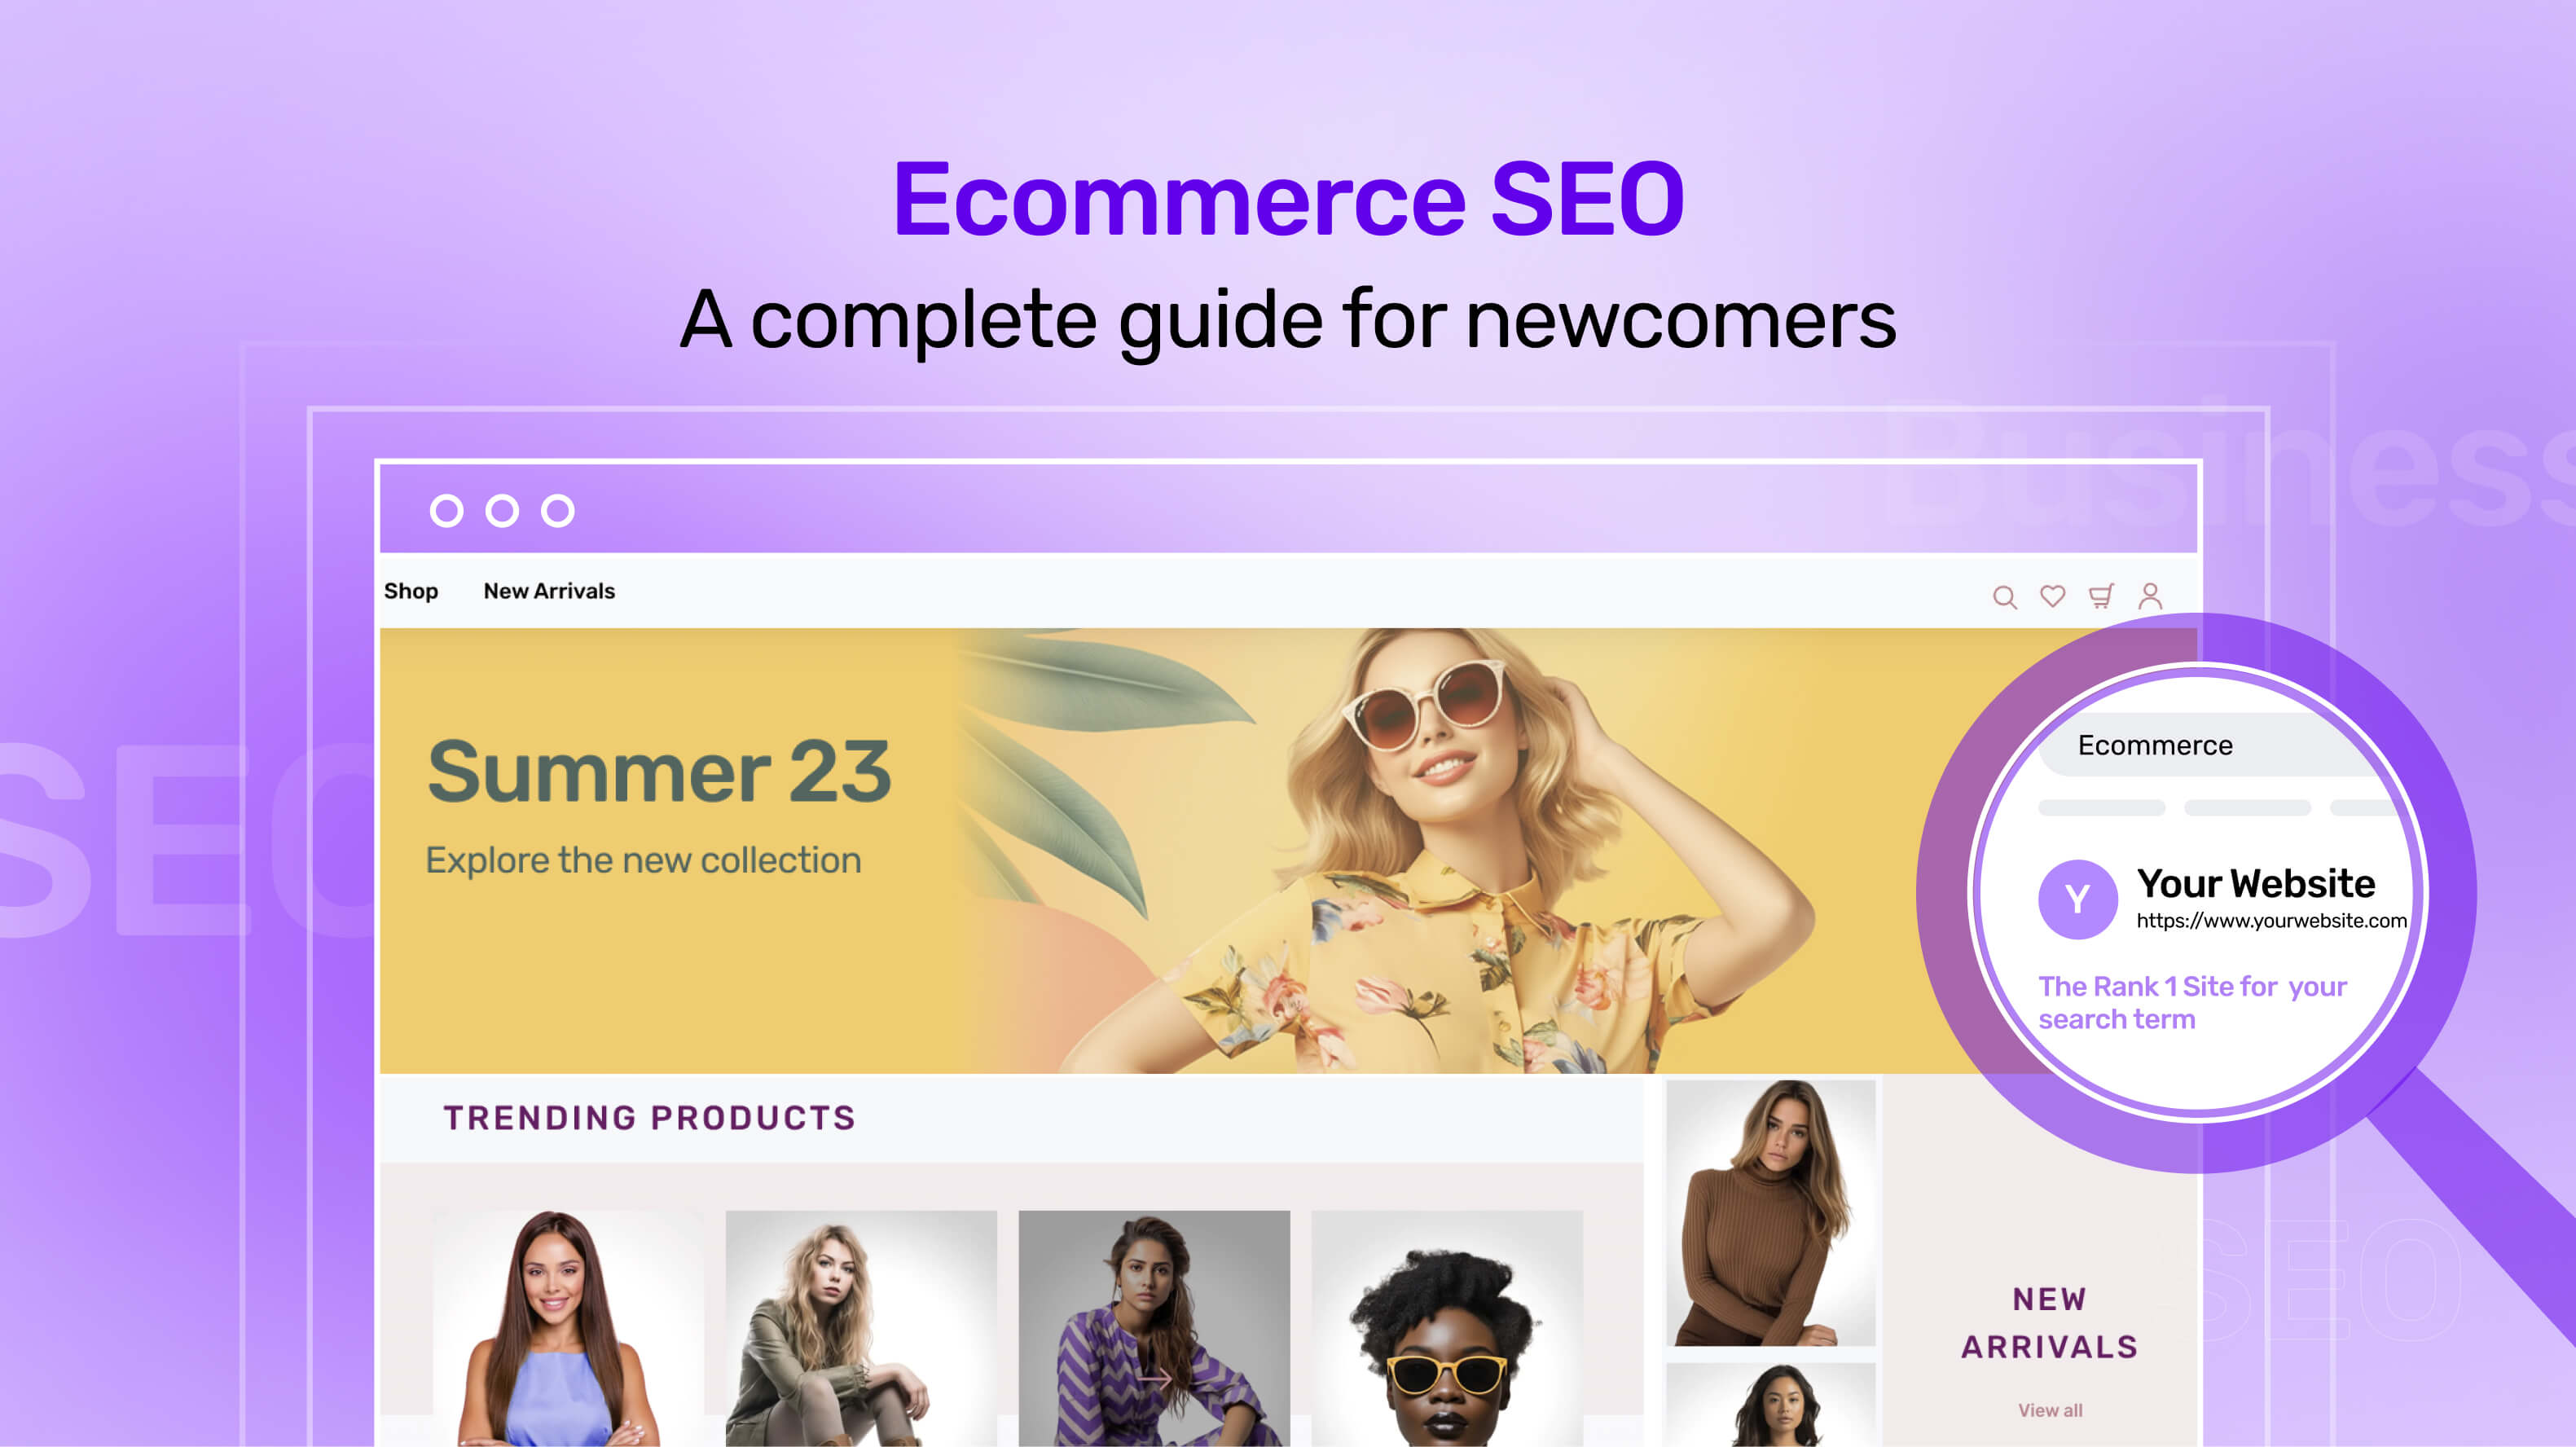 Complete guide to Ecommerce SEO for newcomers